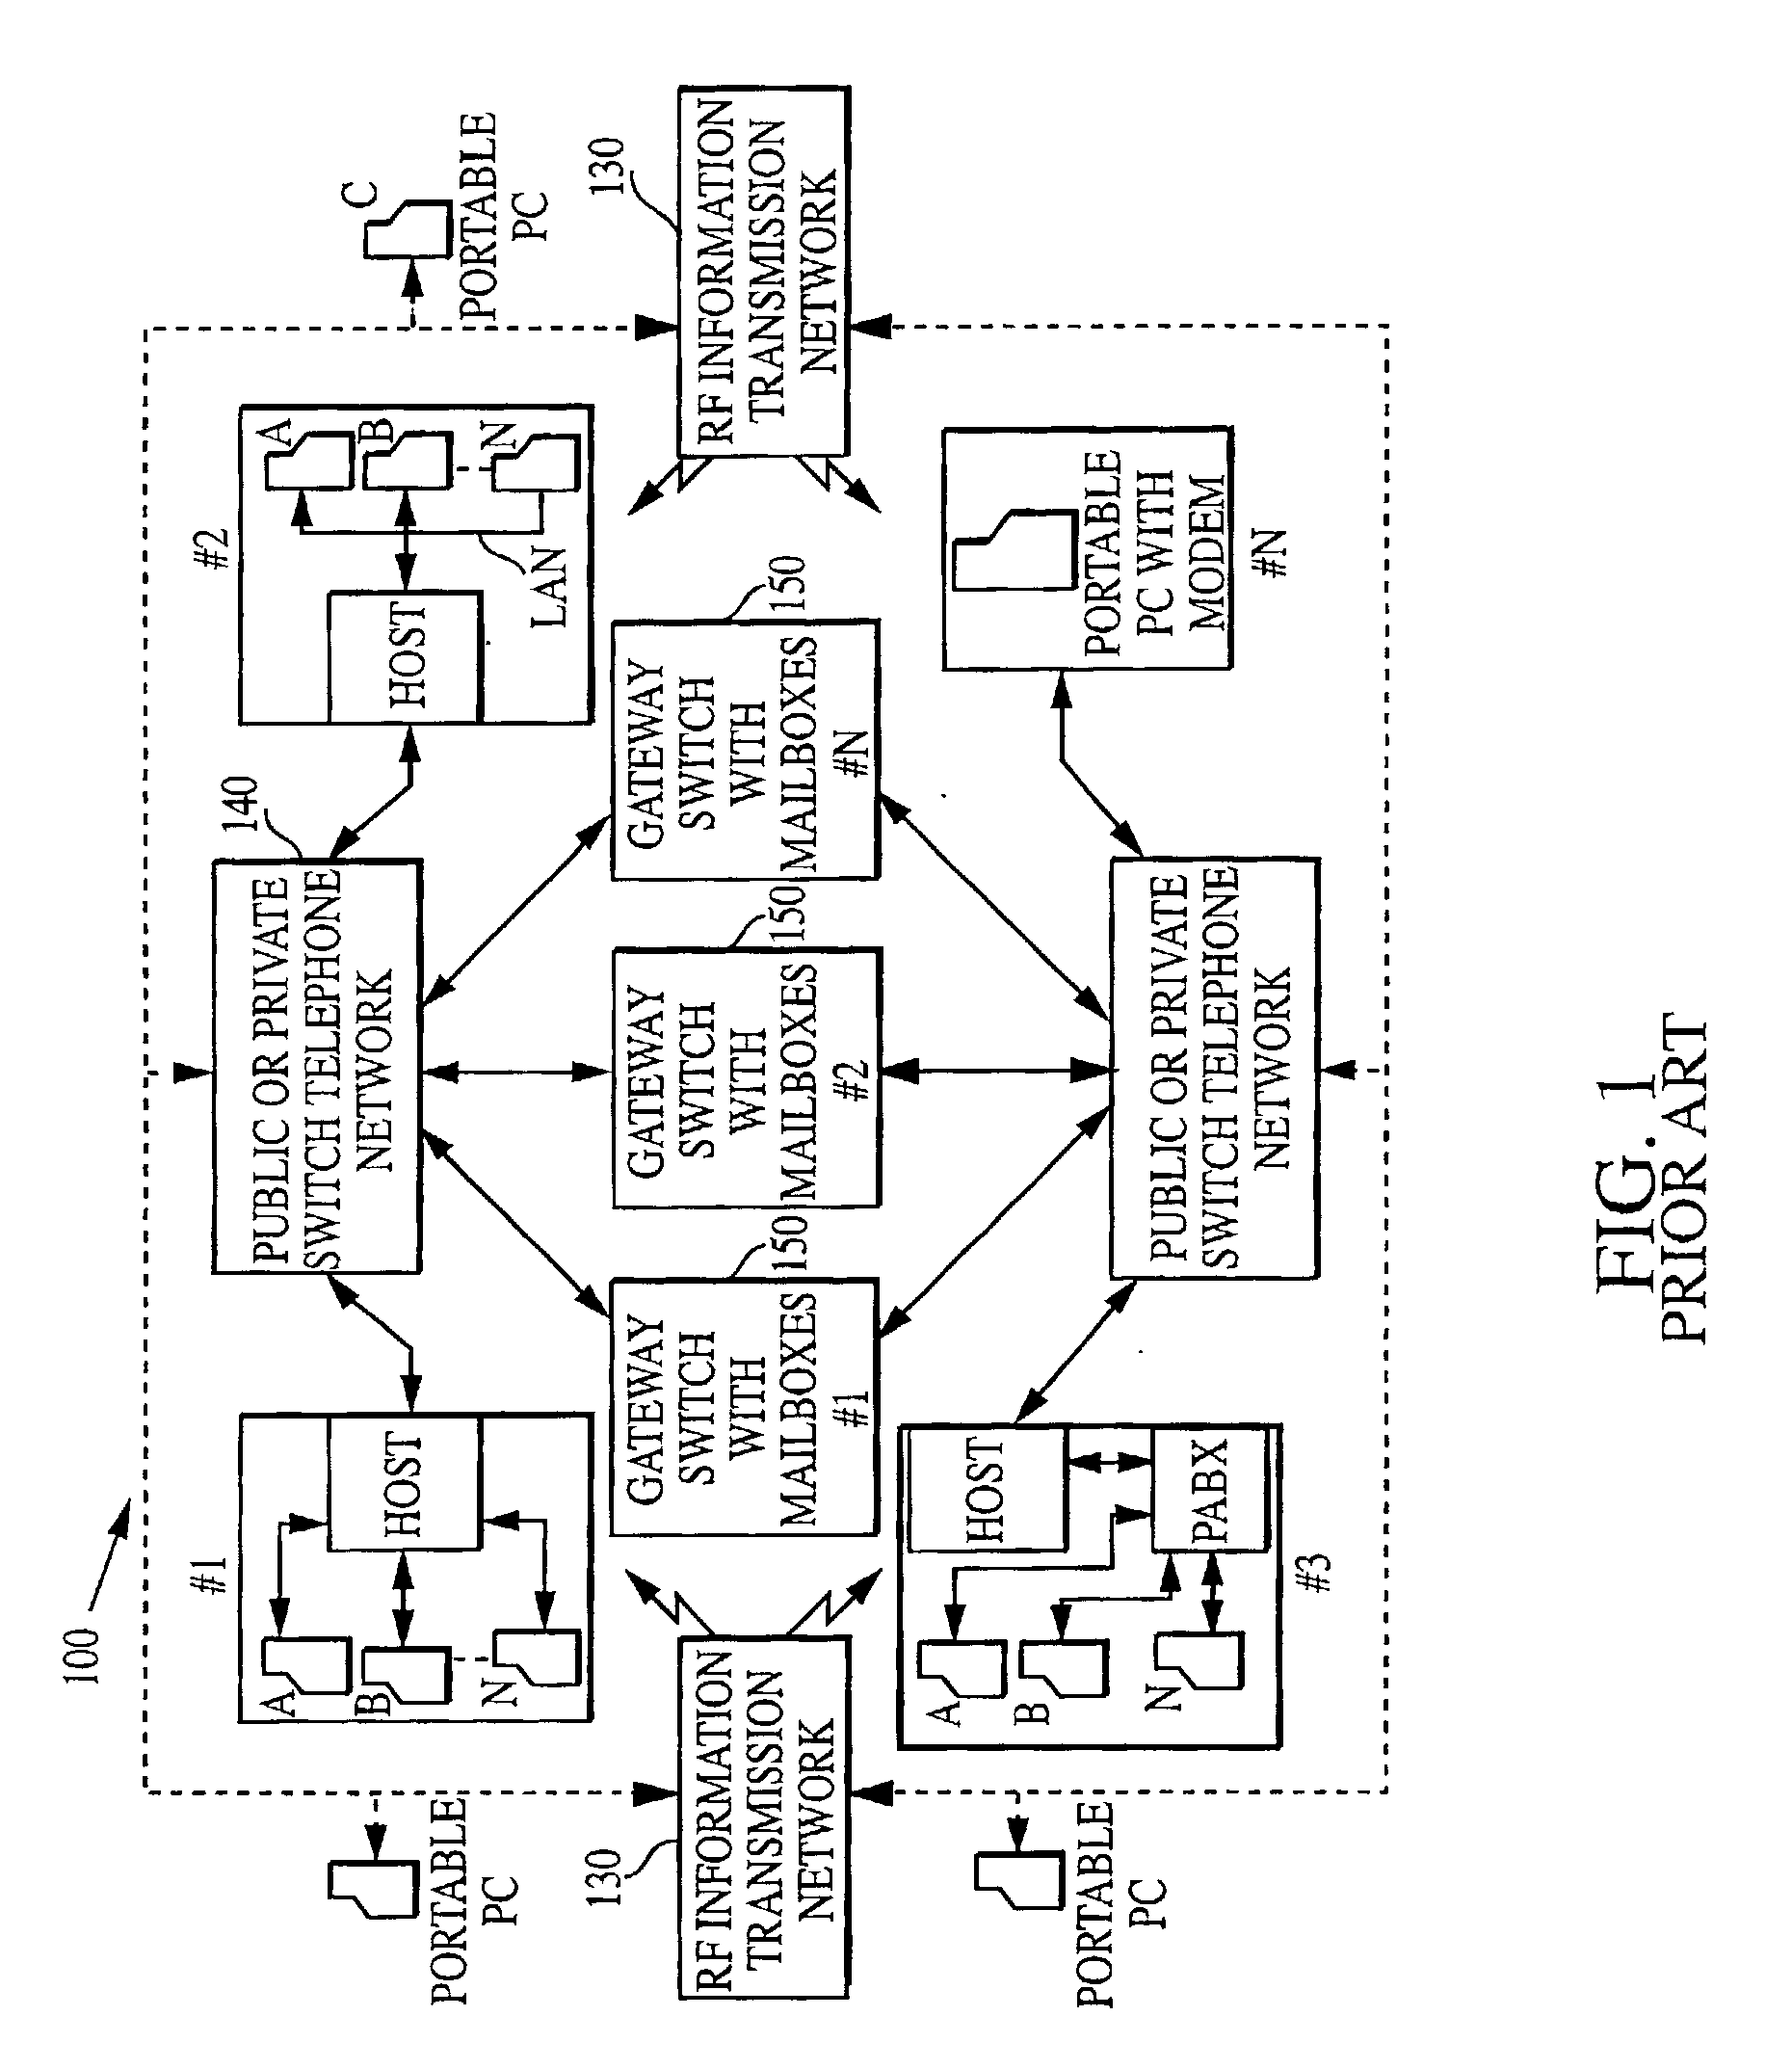 System and method of transmitting data messages between subscriber units communicating with/between Complementary/Disparate Networks